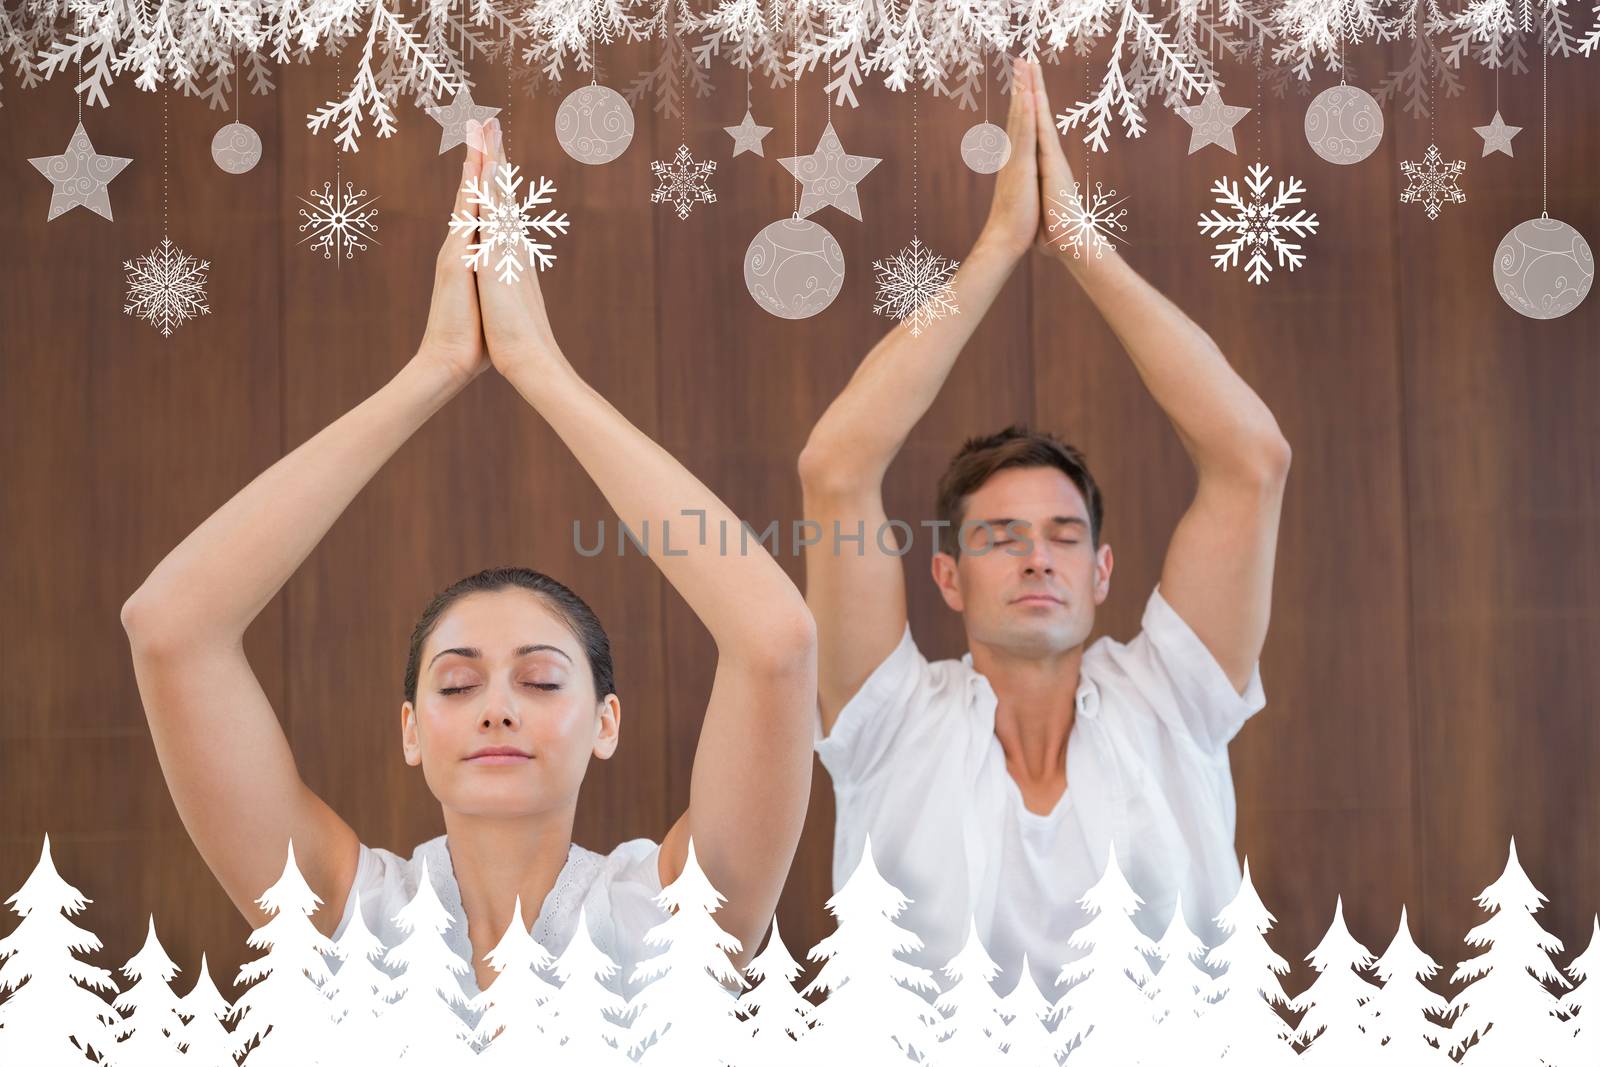 Peaceful couple in white doing yoga together with hands raised against fir tree forest and snowflakes